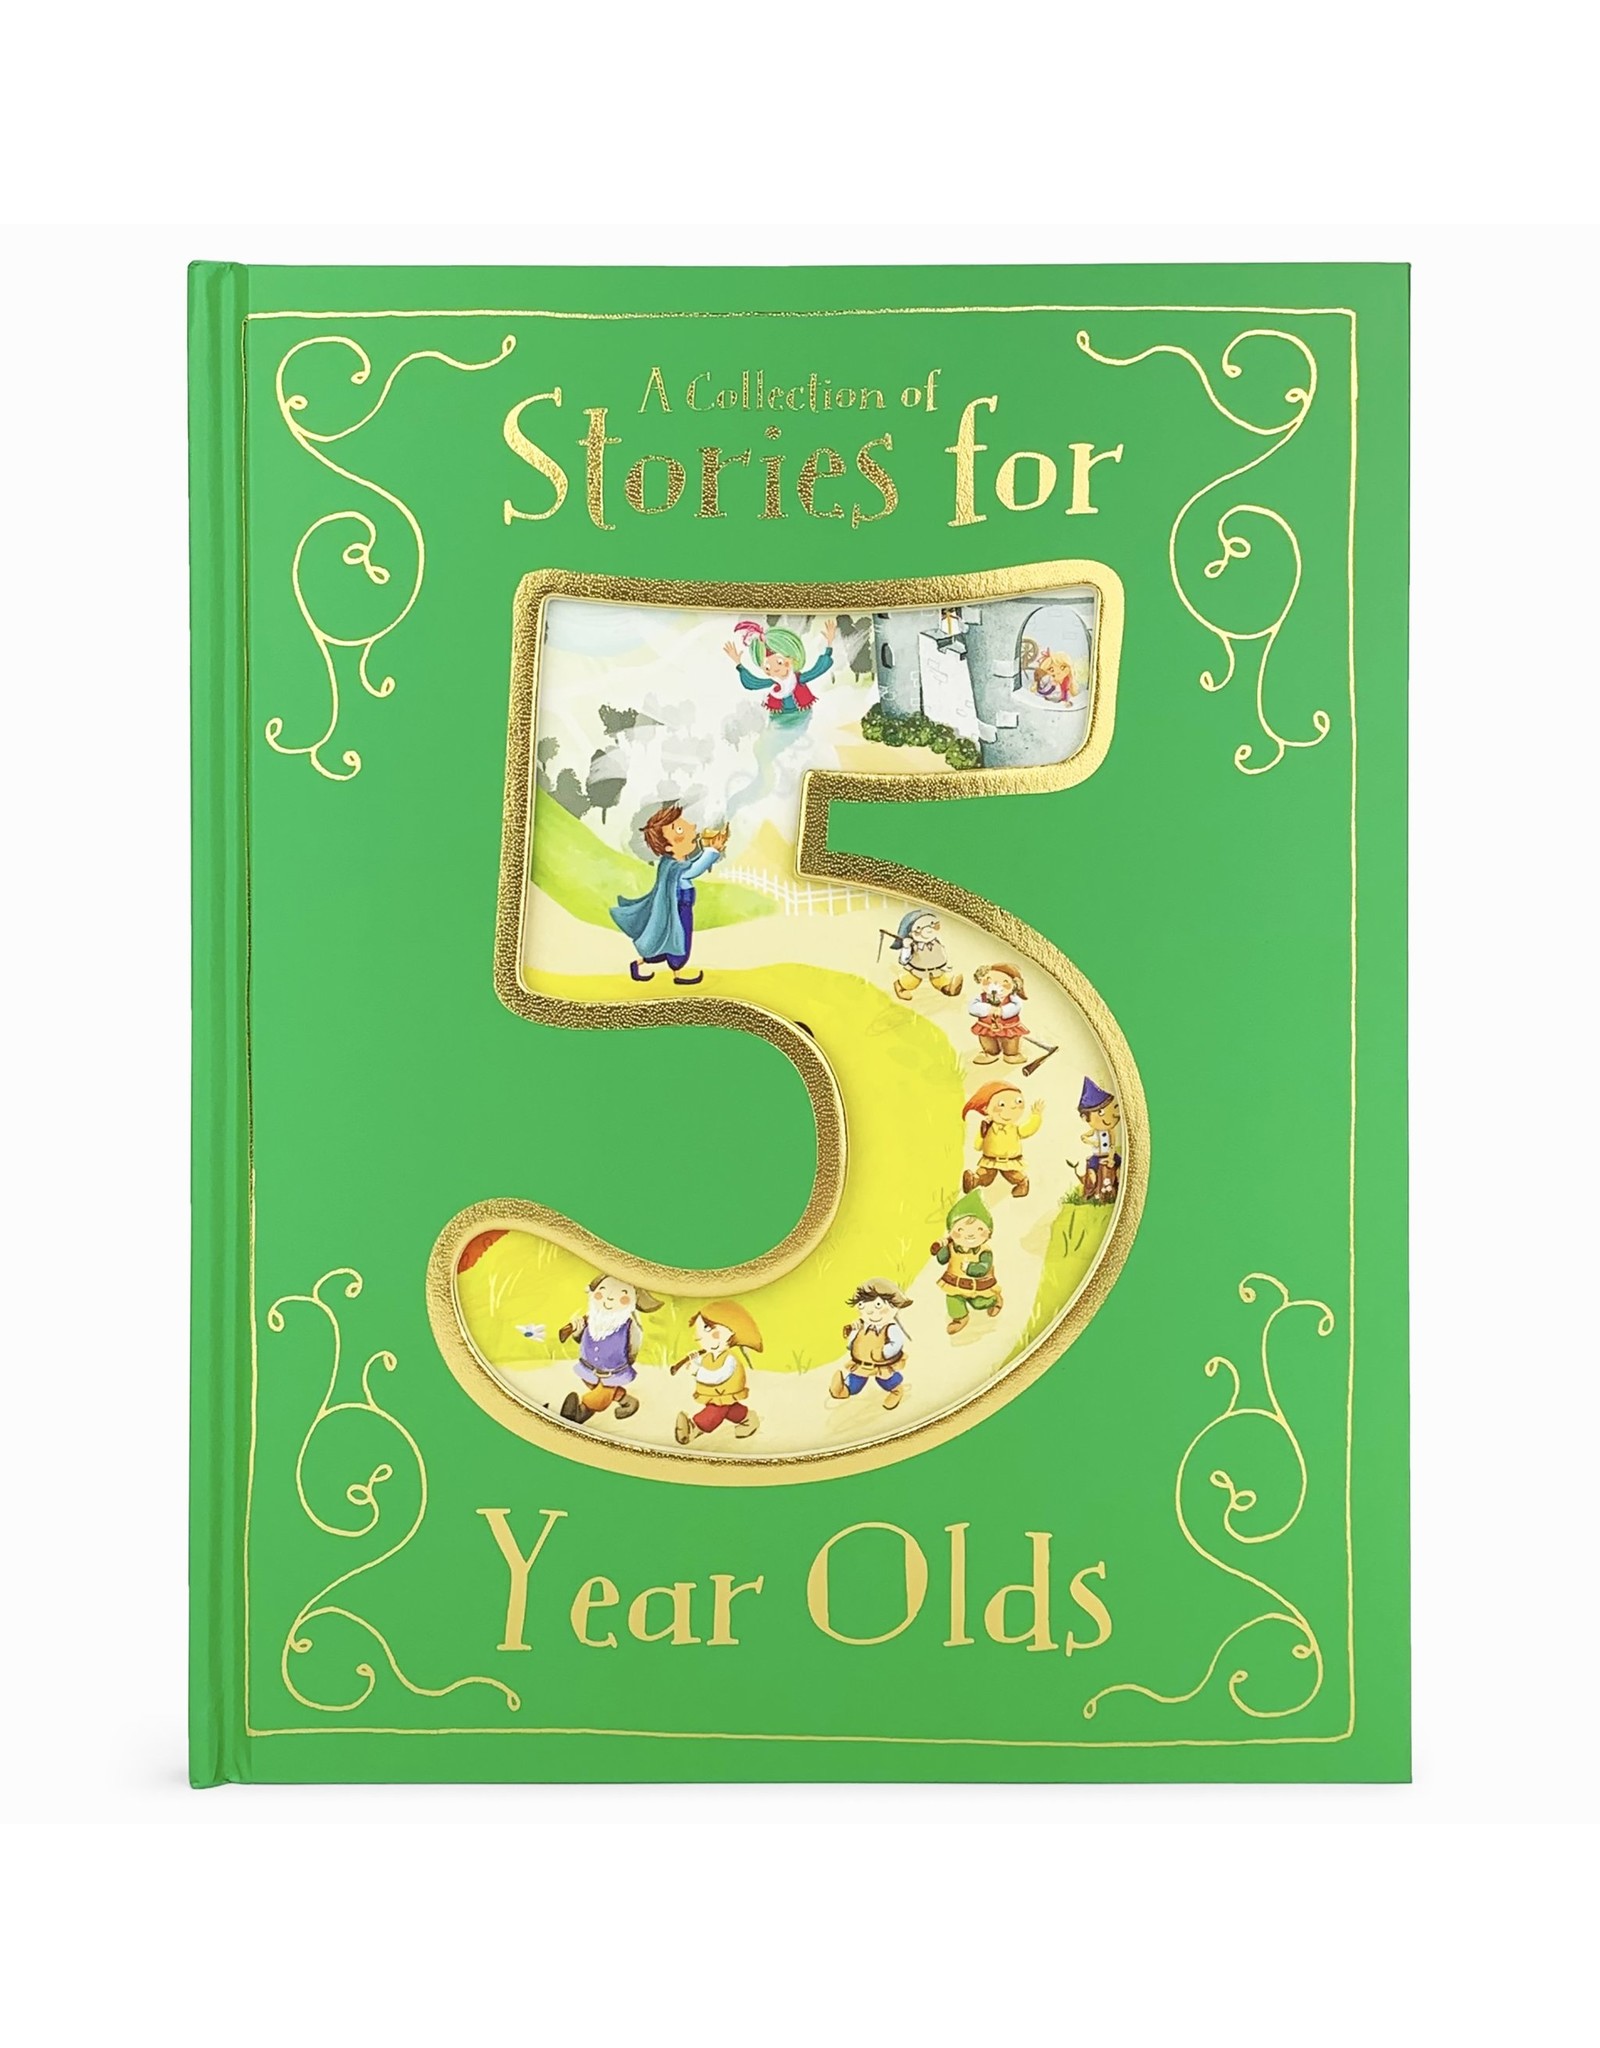 Stories for 5-Year-Olds